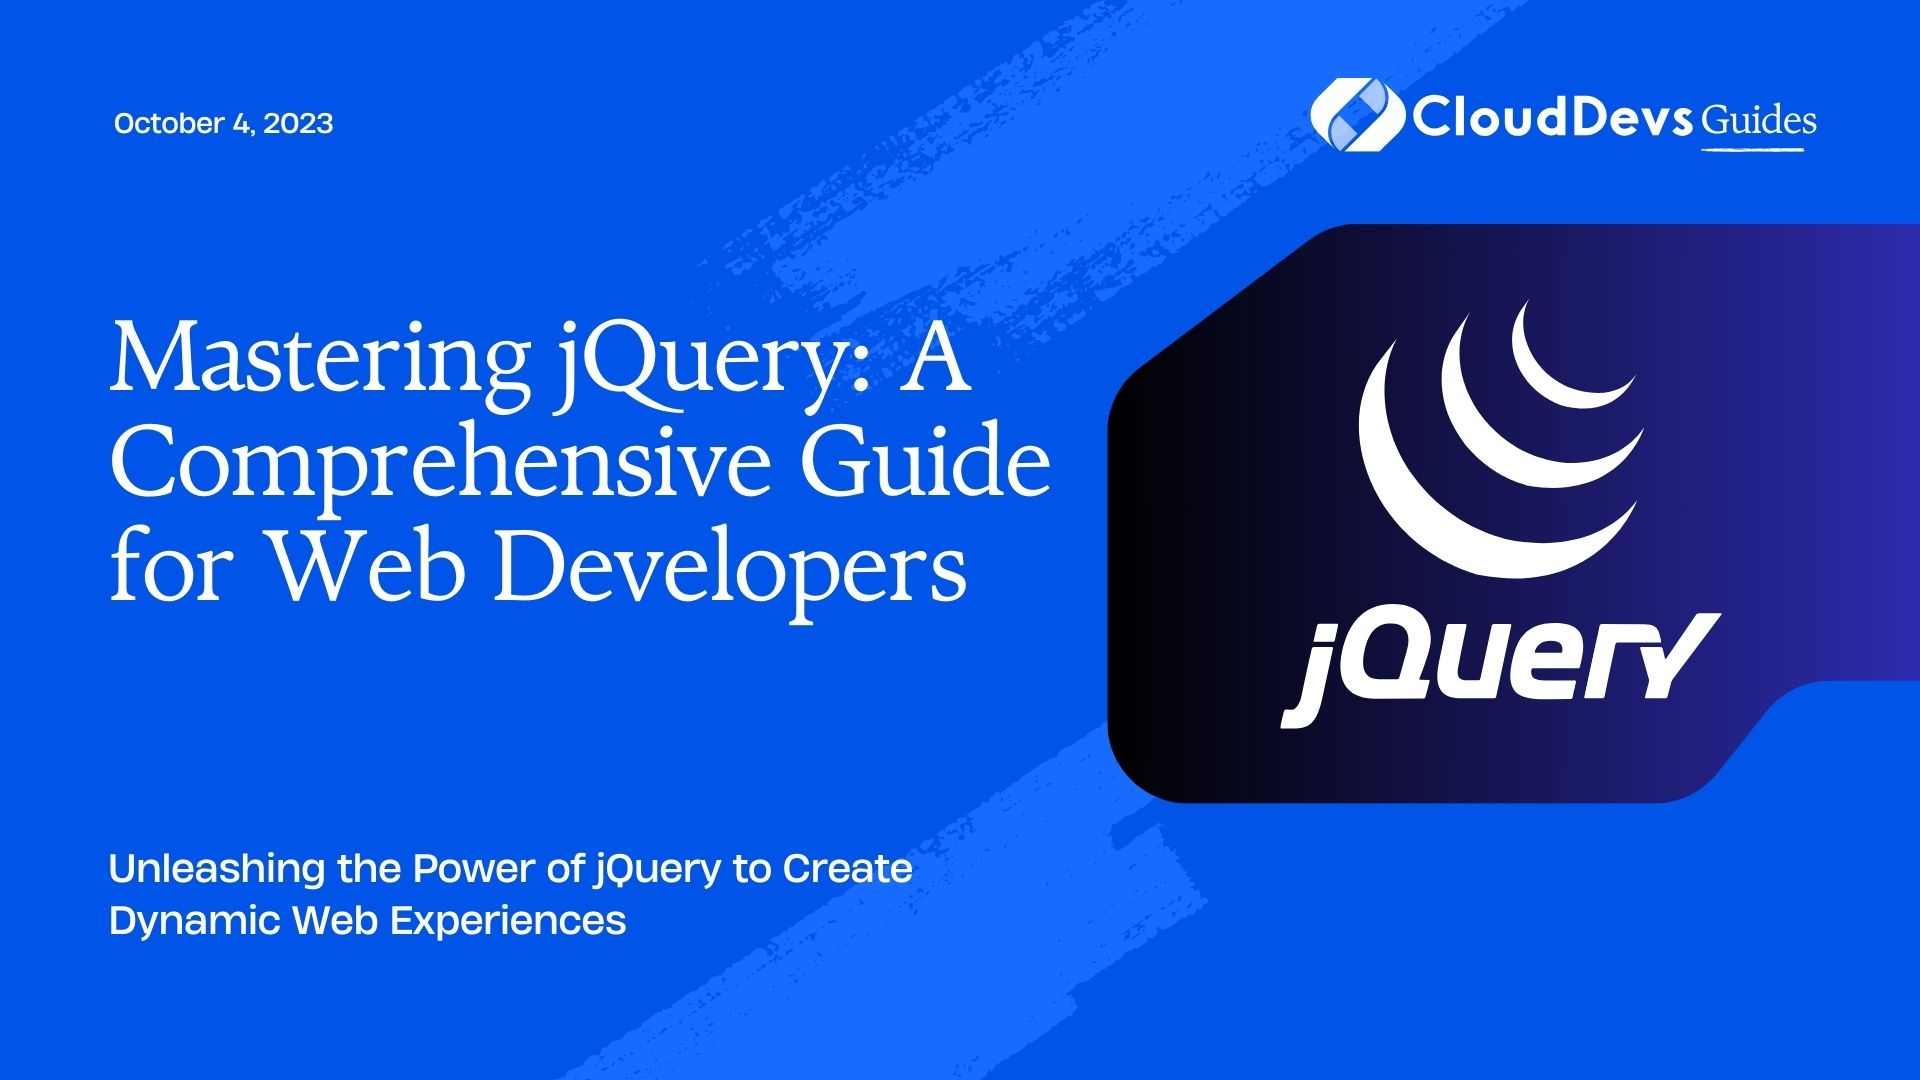 Mastering jQuery: A Comprehensive Guide for Web Developers